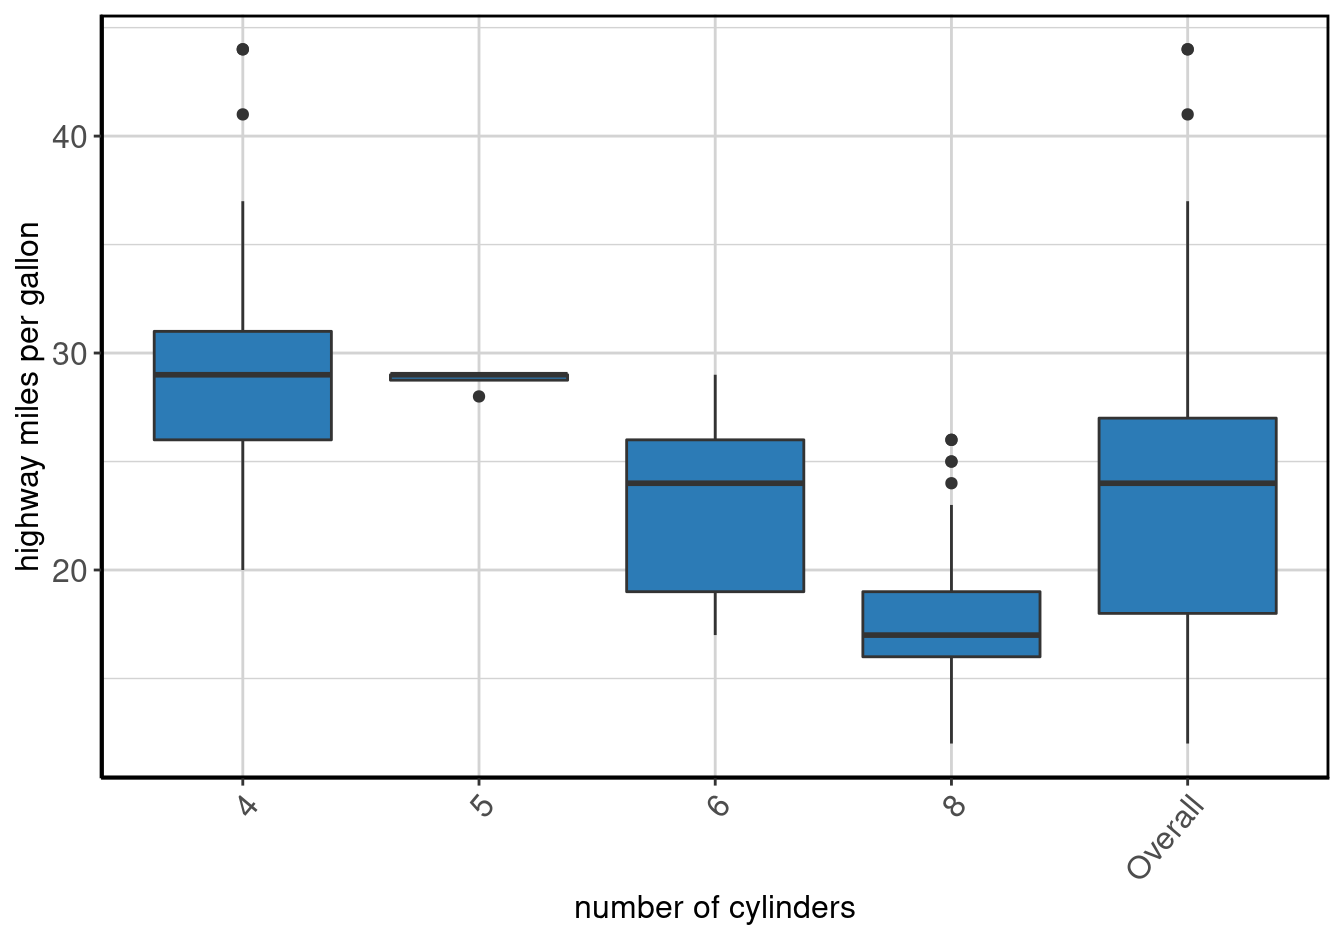 Boxplot of <b>highway miles per gallon</b> by <b>number of cylinders</b>.